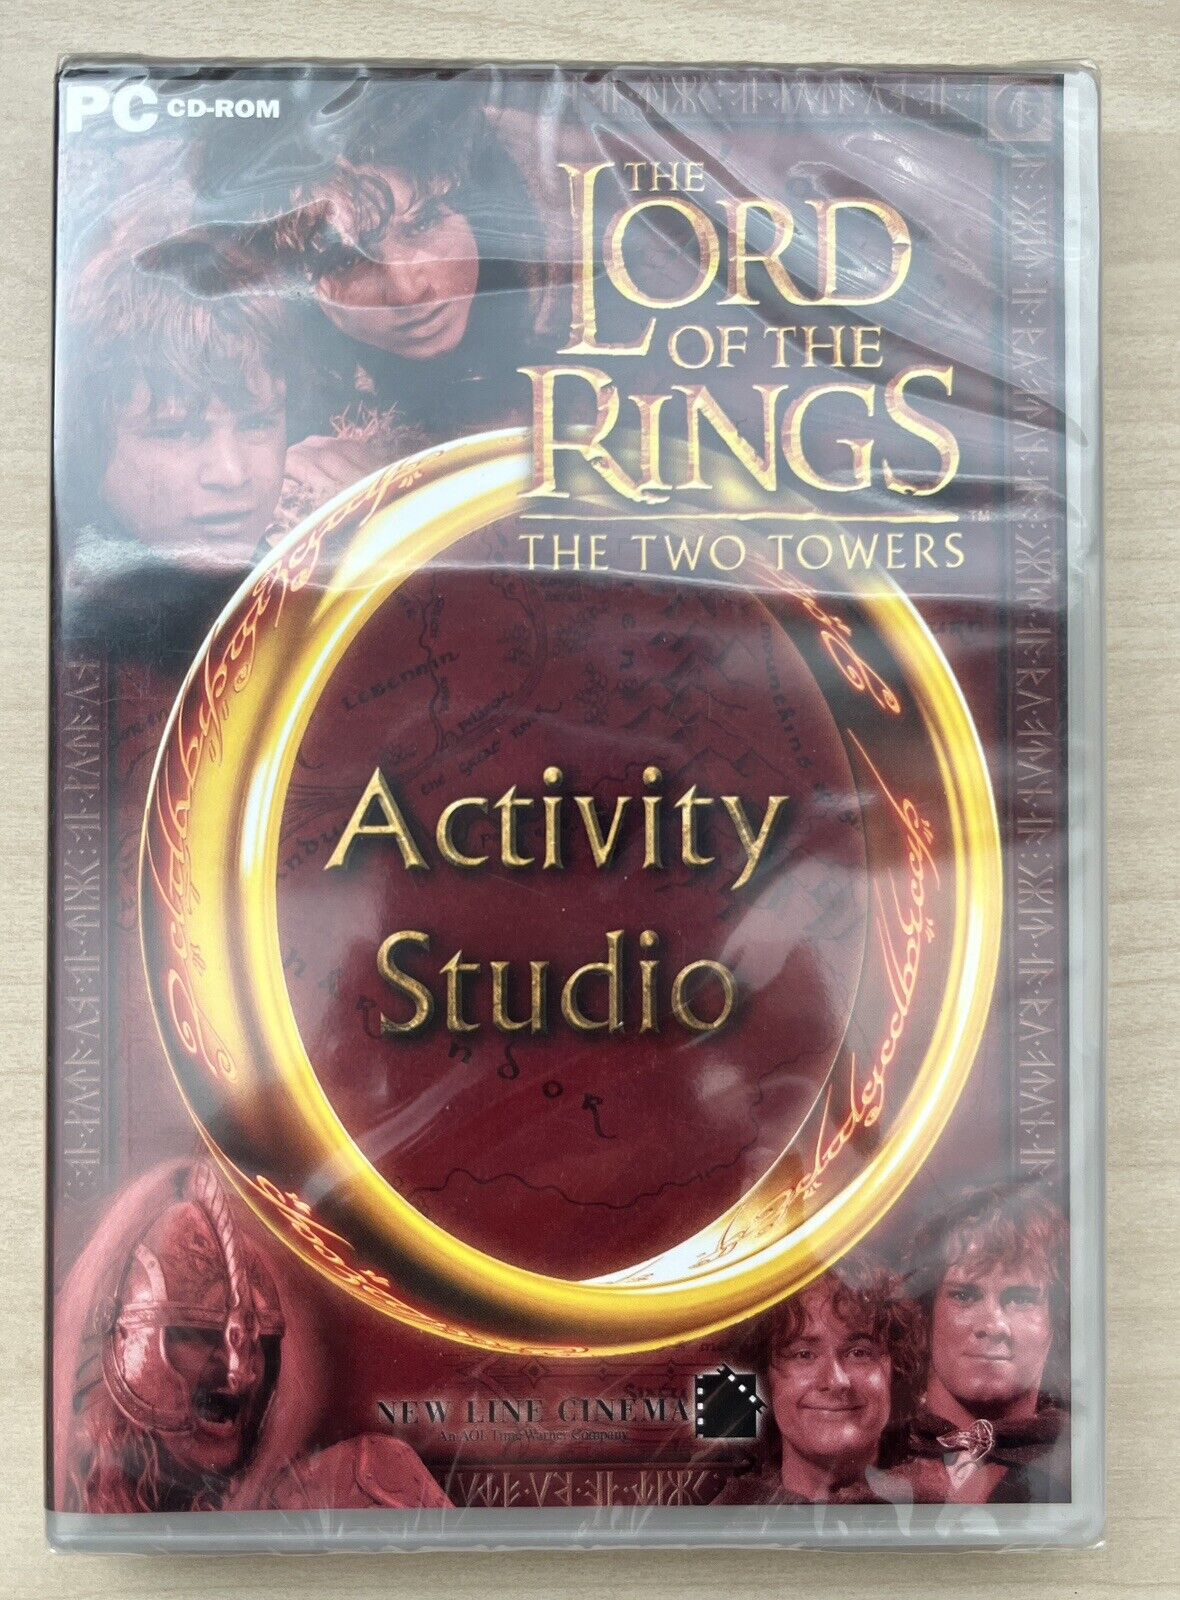 RARE The Lord Of The Rings The Two Towers Activity Studio for PC Collectible